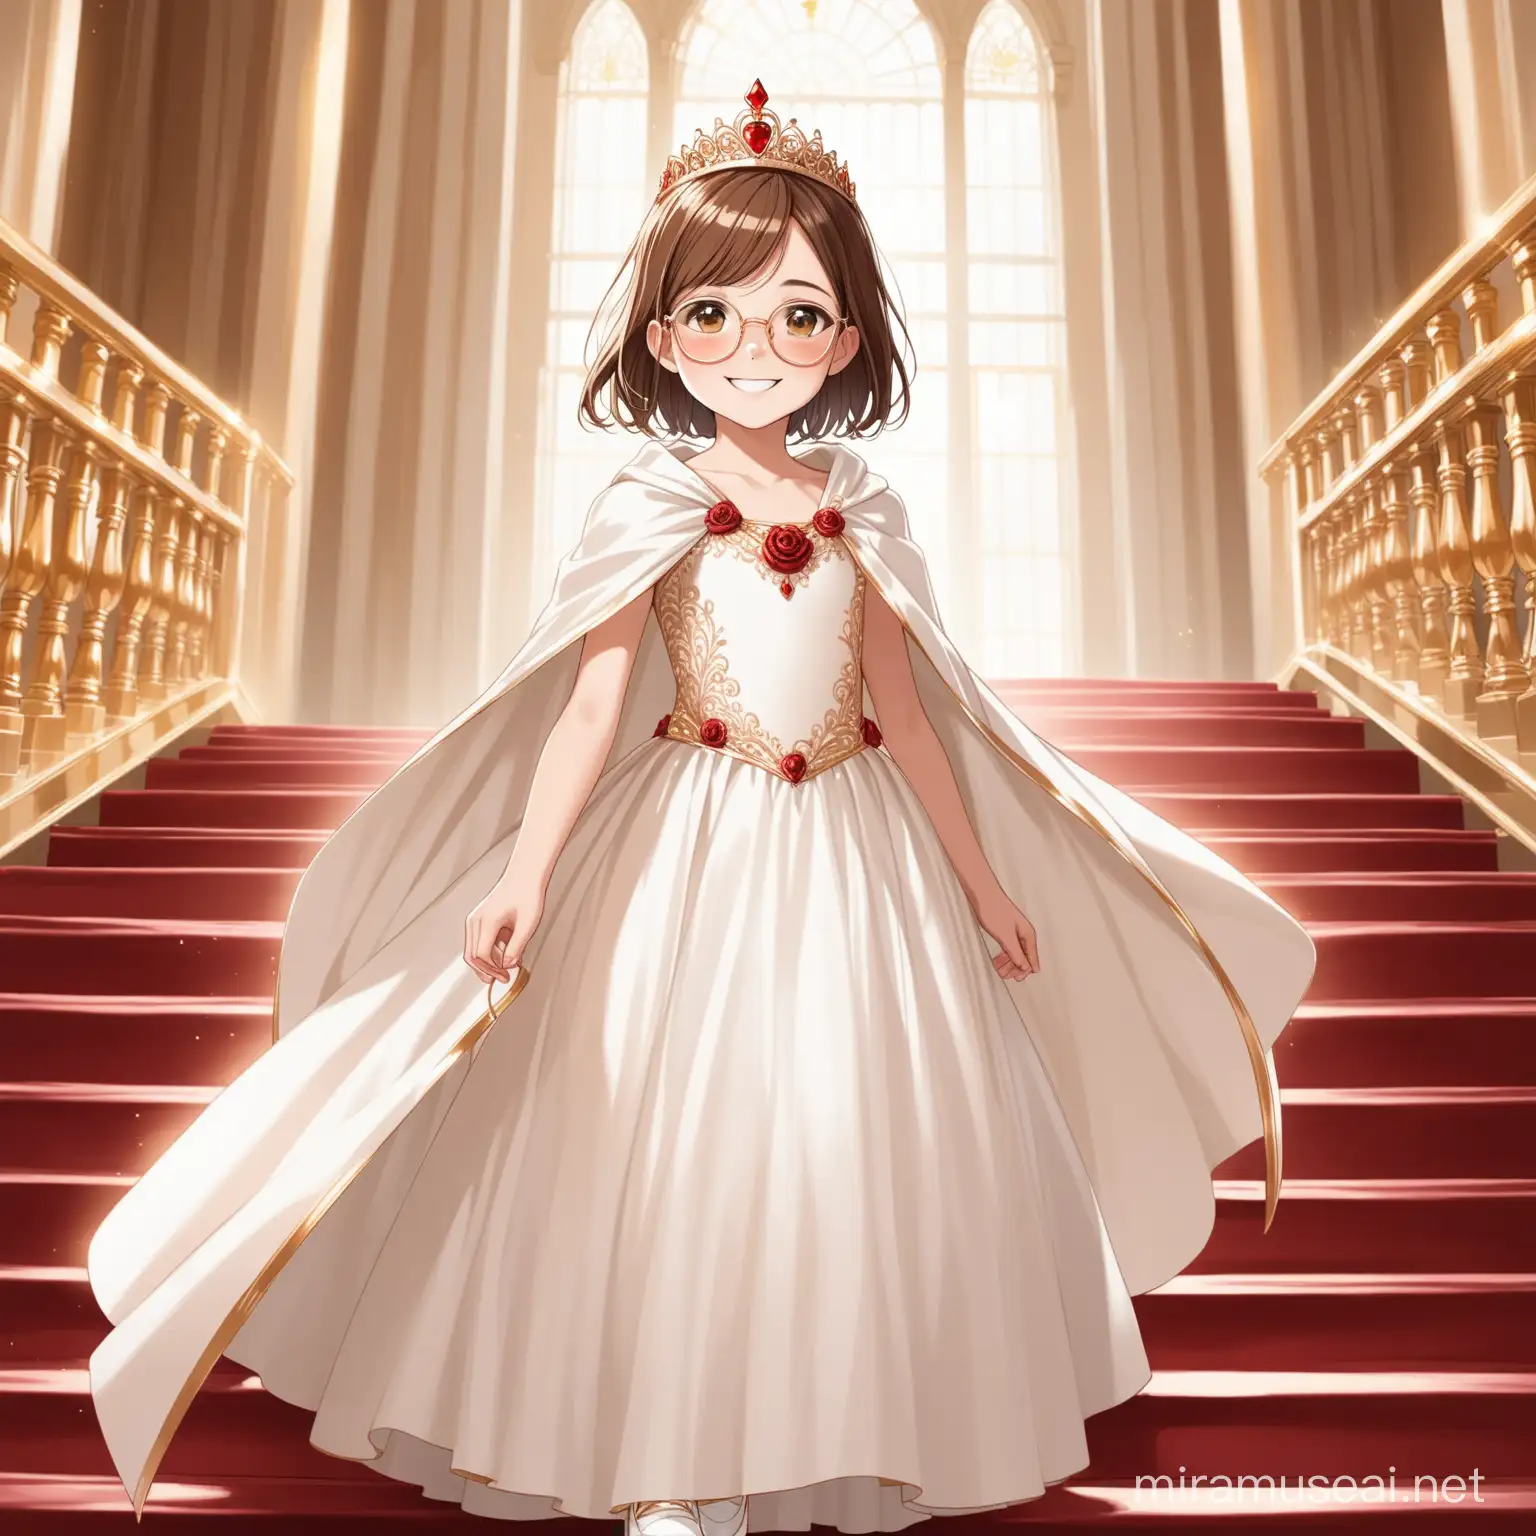 Elegant Young Girl Descending Grand Staircase in Rose Gold Ball Gown and Tiara